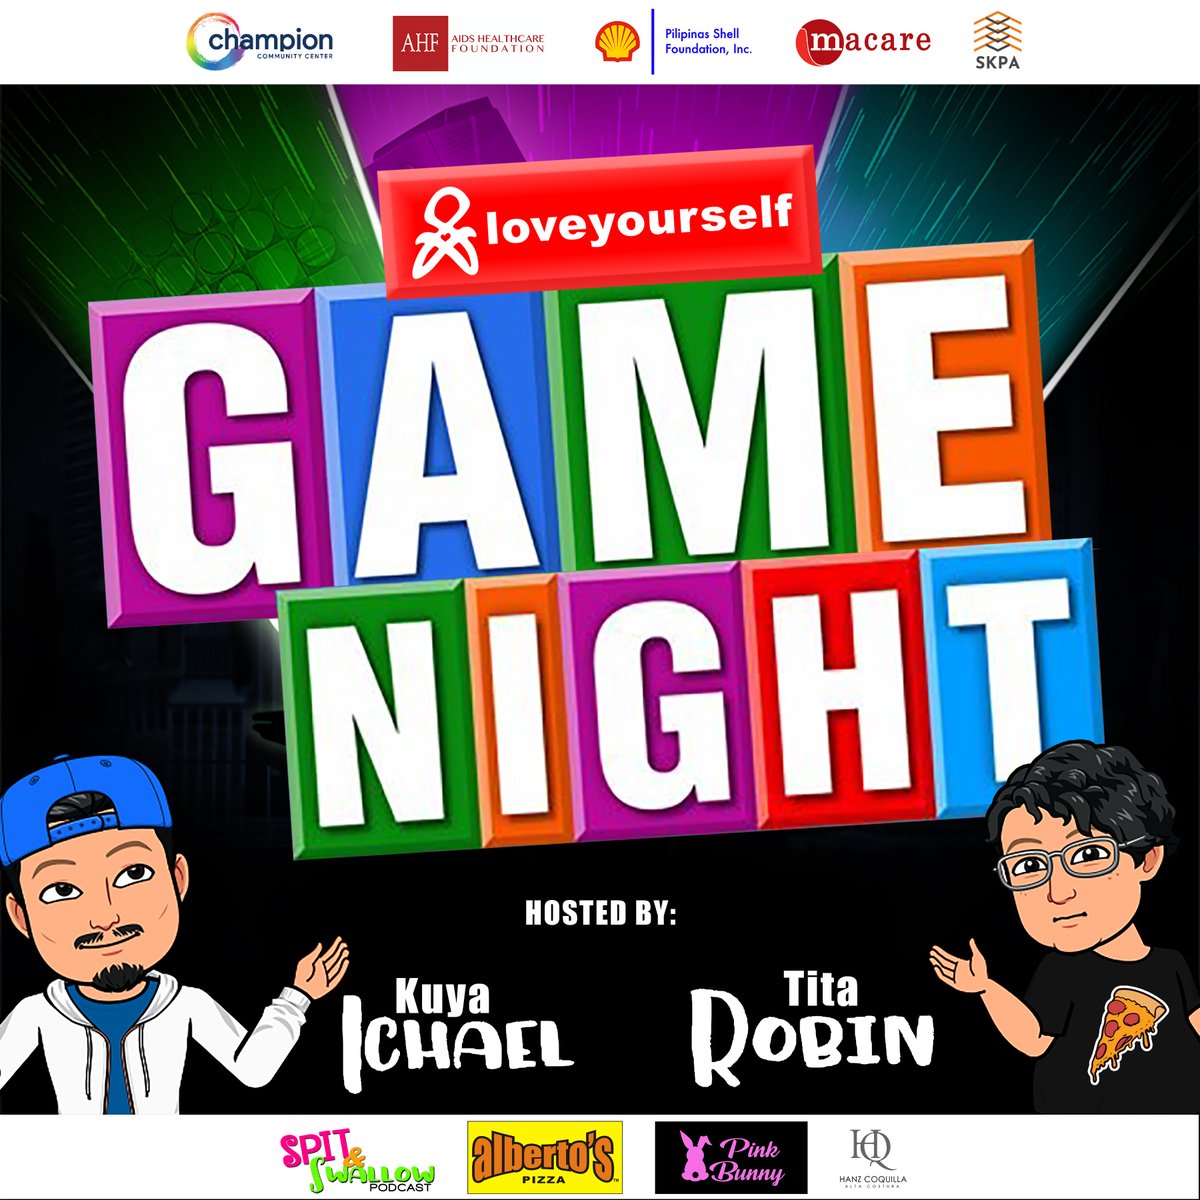 Exciting new prizes are up for grab for tonight's LoveYourself White House Game Night - Round 3! Join us tonight at 6PM and invite your friends as well. Kita-kits mga bai! #OneLoveYourselfCebu